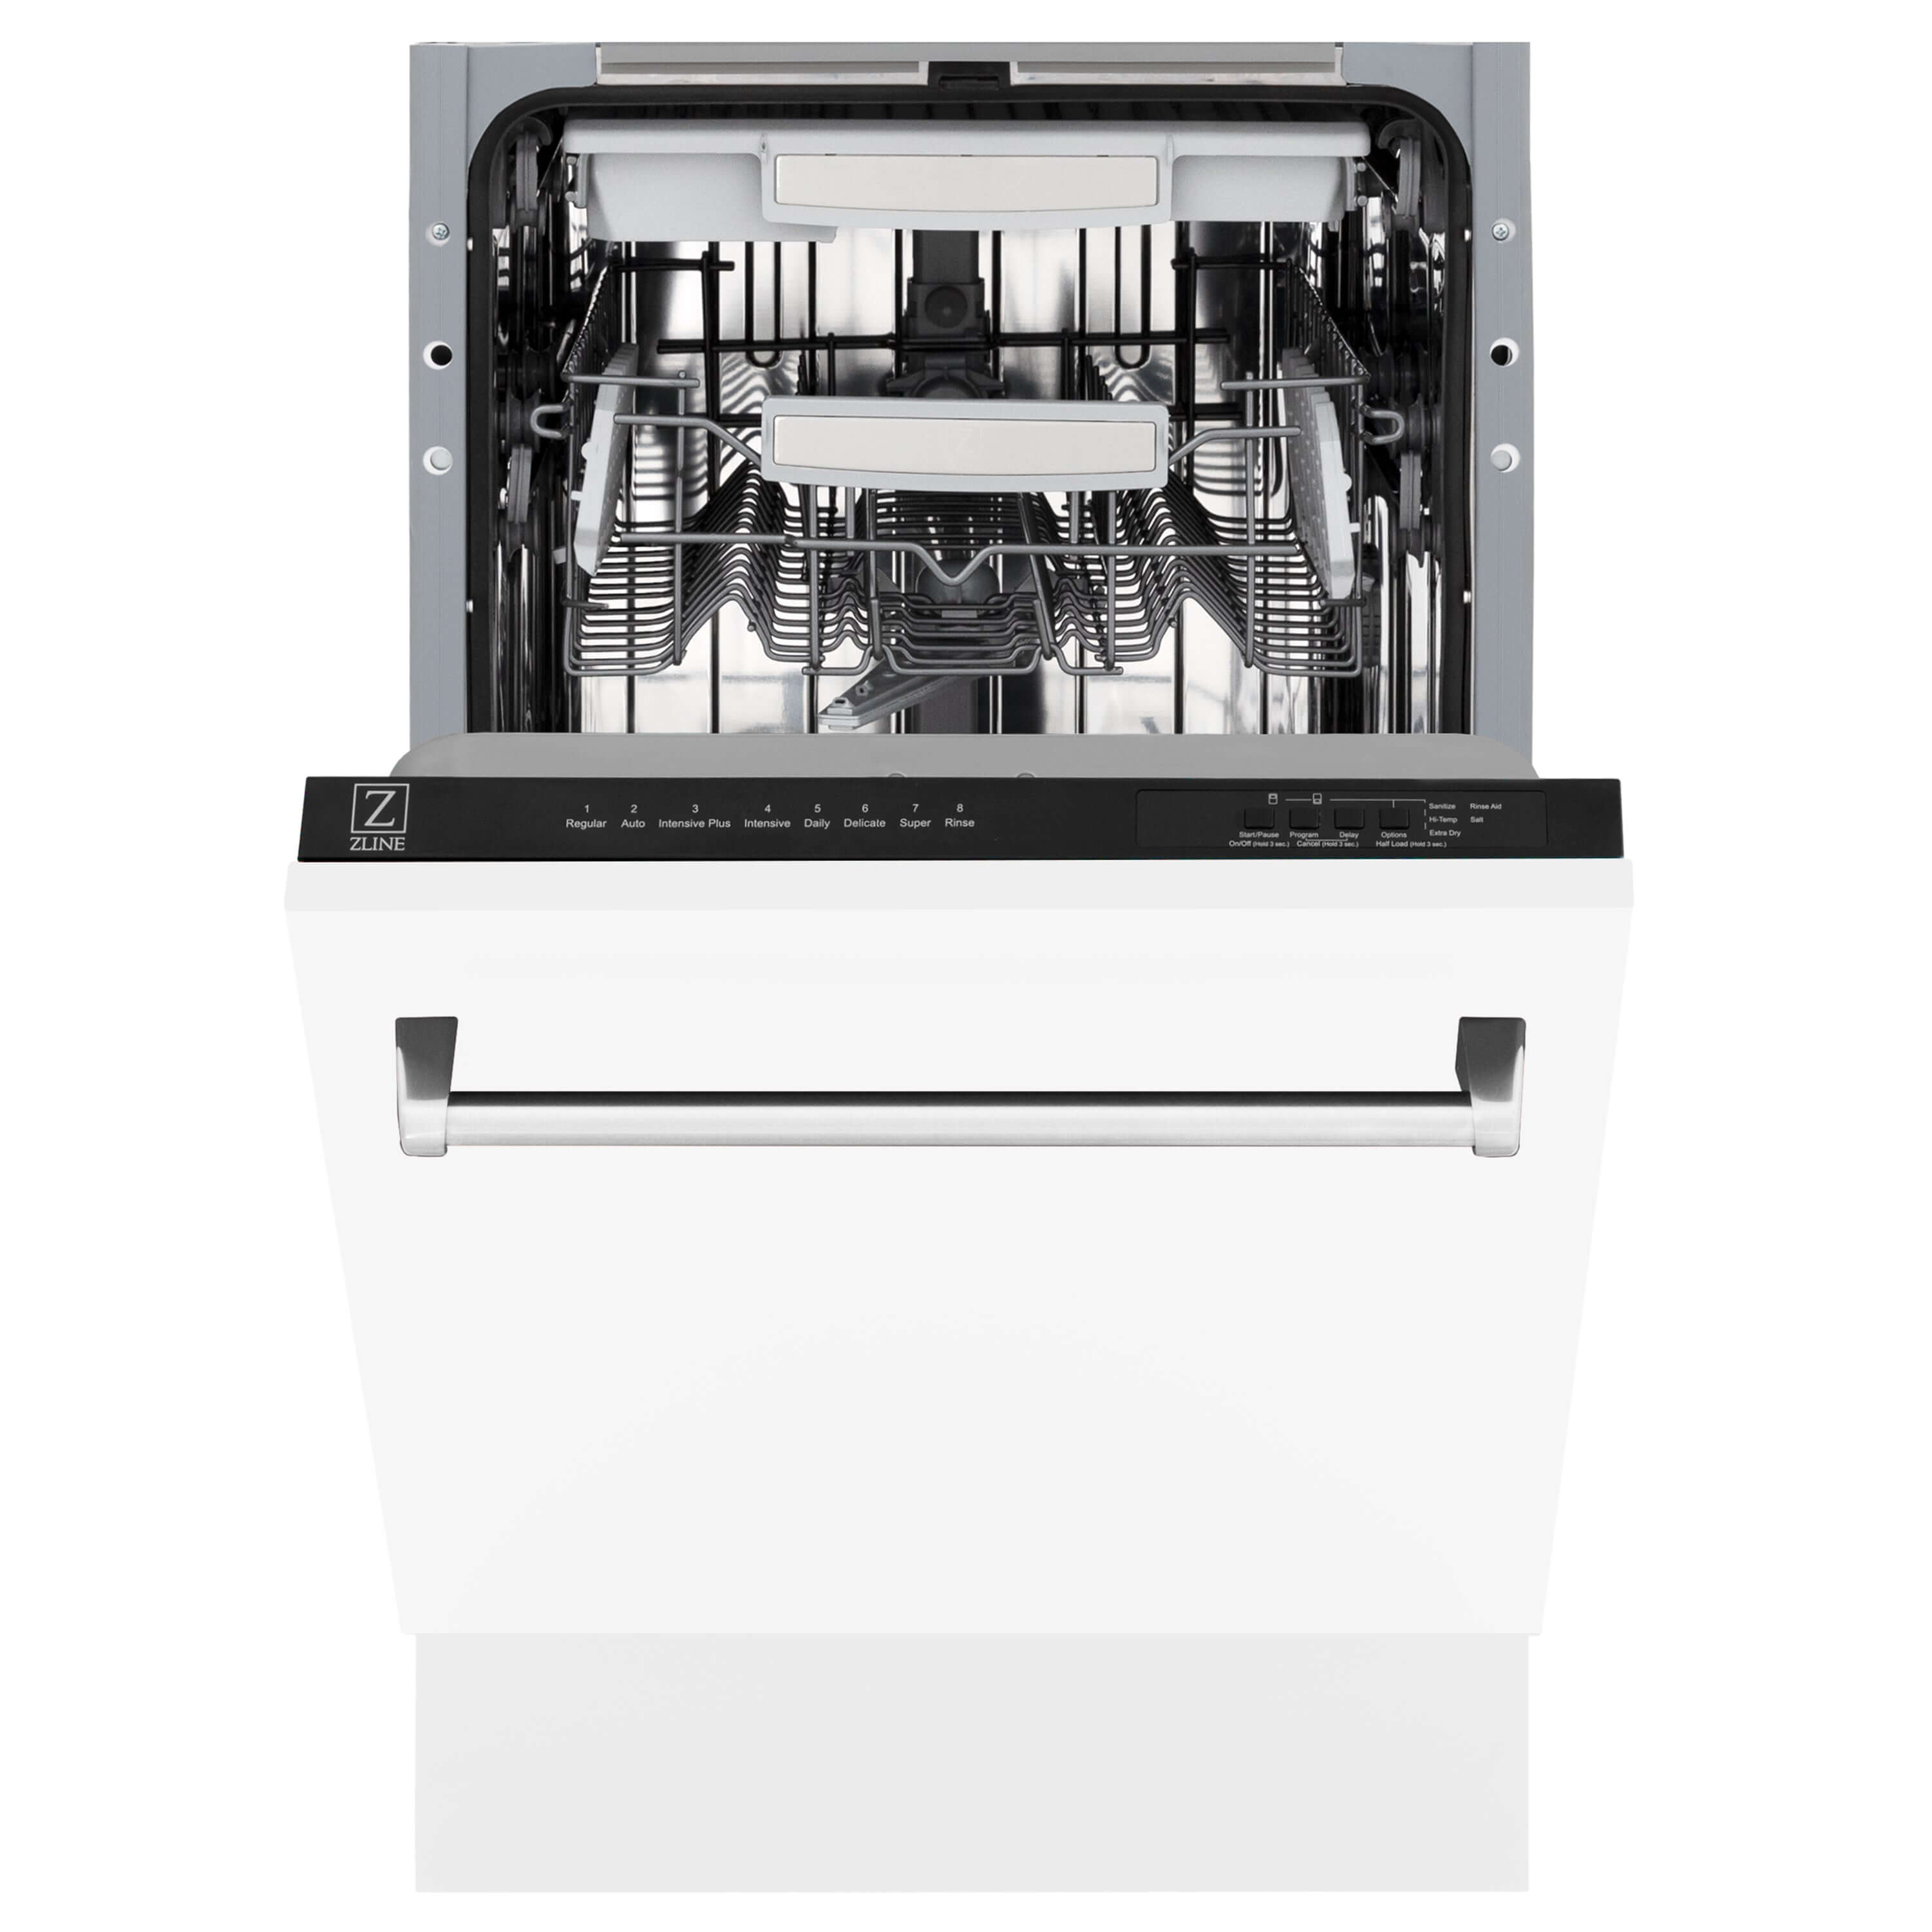 ZLINE 18 in. Tallac Series 3rd Rack Top Control Built-In Dishwasher in White Matte with Stainless Steel Tub, 51dBa (DWV-WM-18) front, half open.